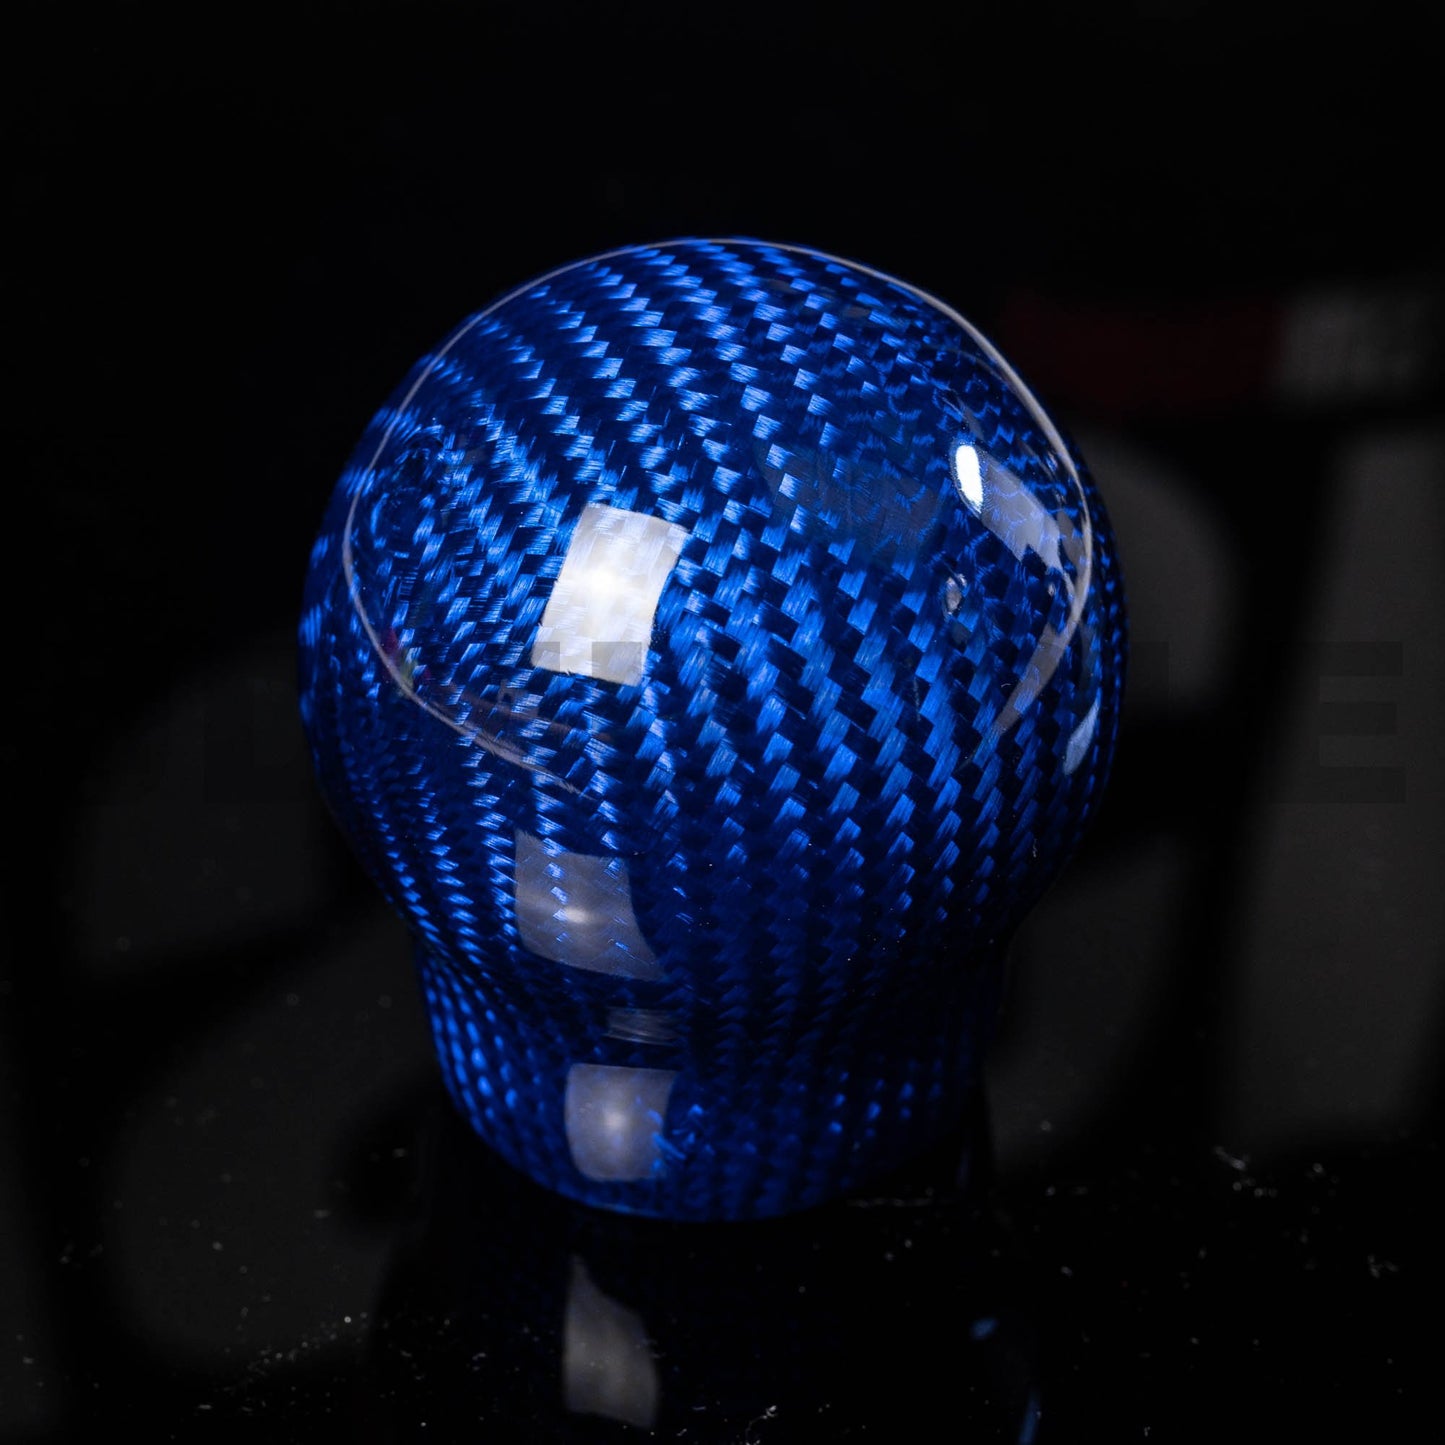 JDMuscle Customized Weighted Shift Knob - Carbon/Leather/Alcantara/Paint-Matched-Shift Knobs-JDMuscle-JDMuscle